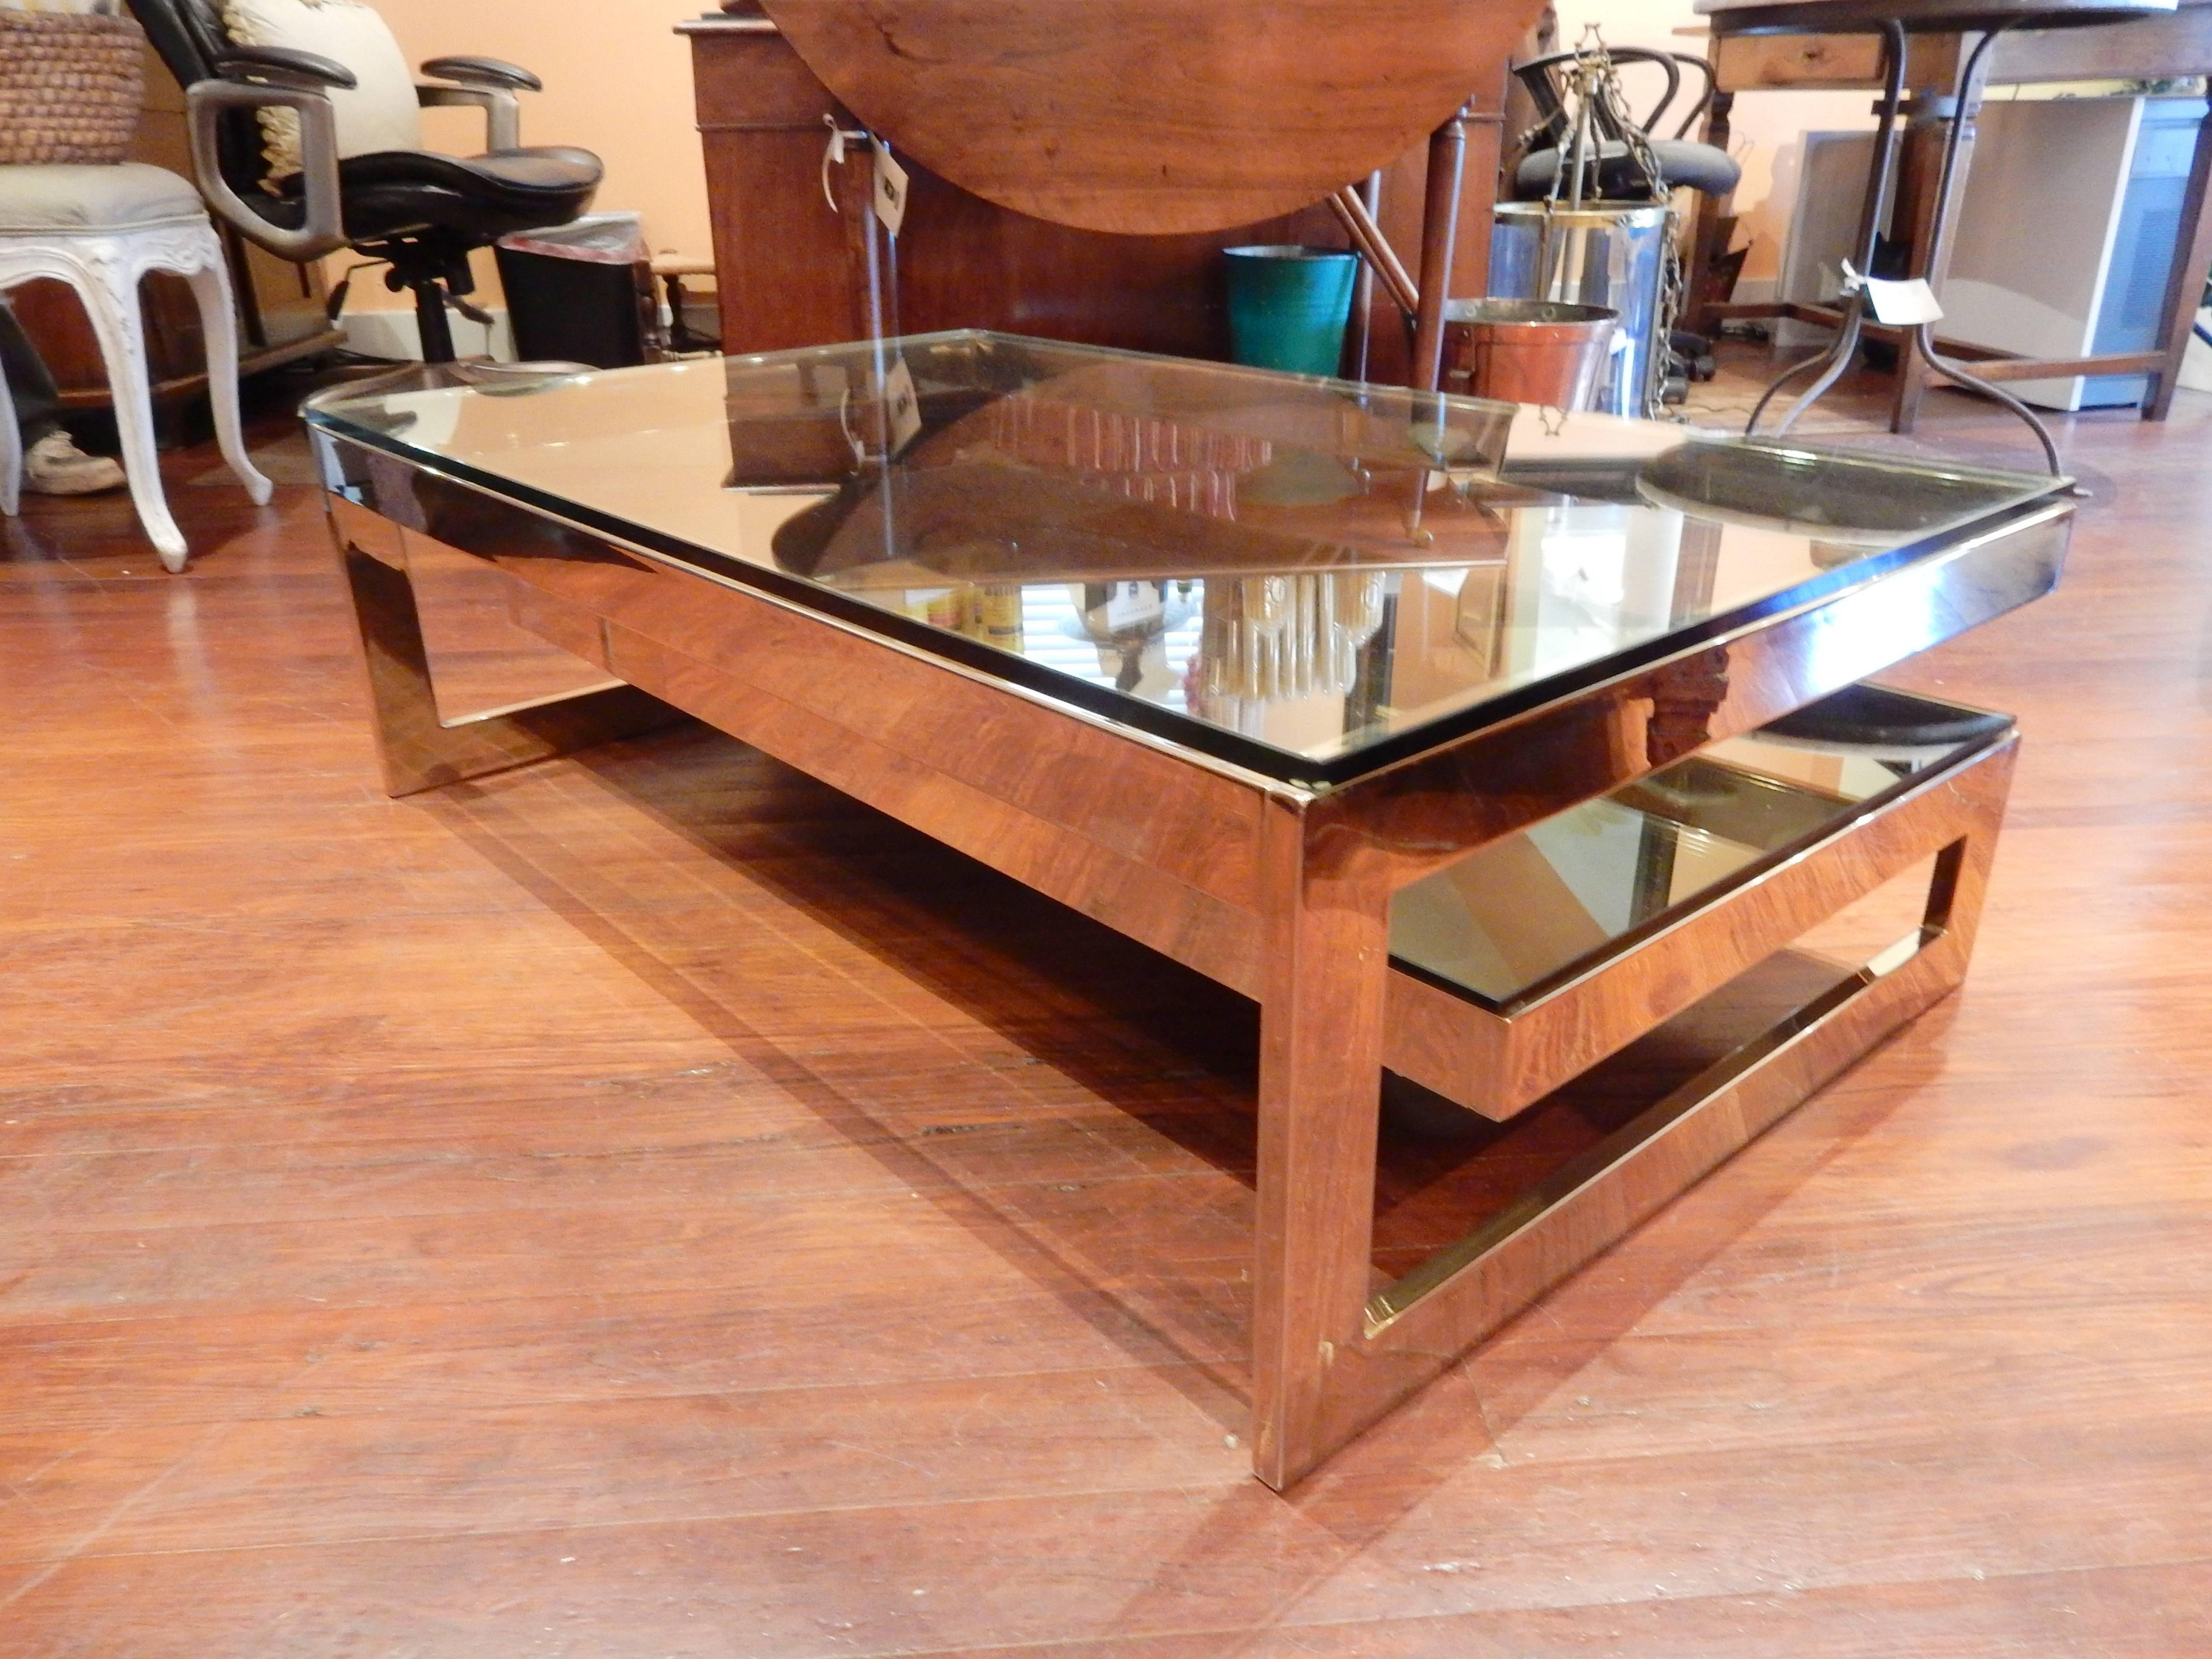 Belgium 1970s G design coffee table with gold washed brass finish. Top glass is clear and bottom glass is smoked.